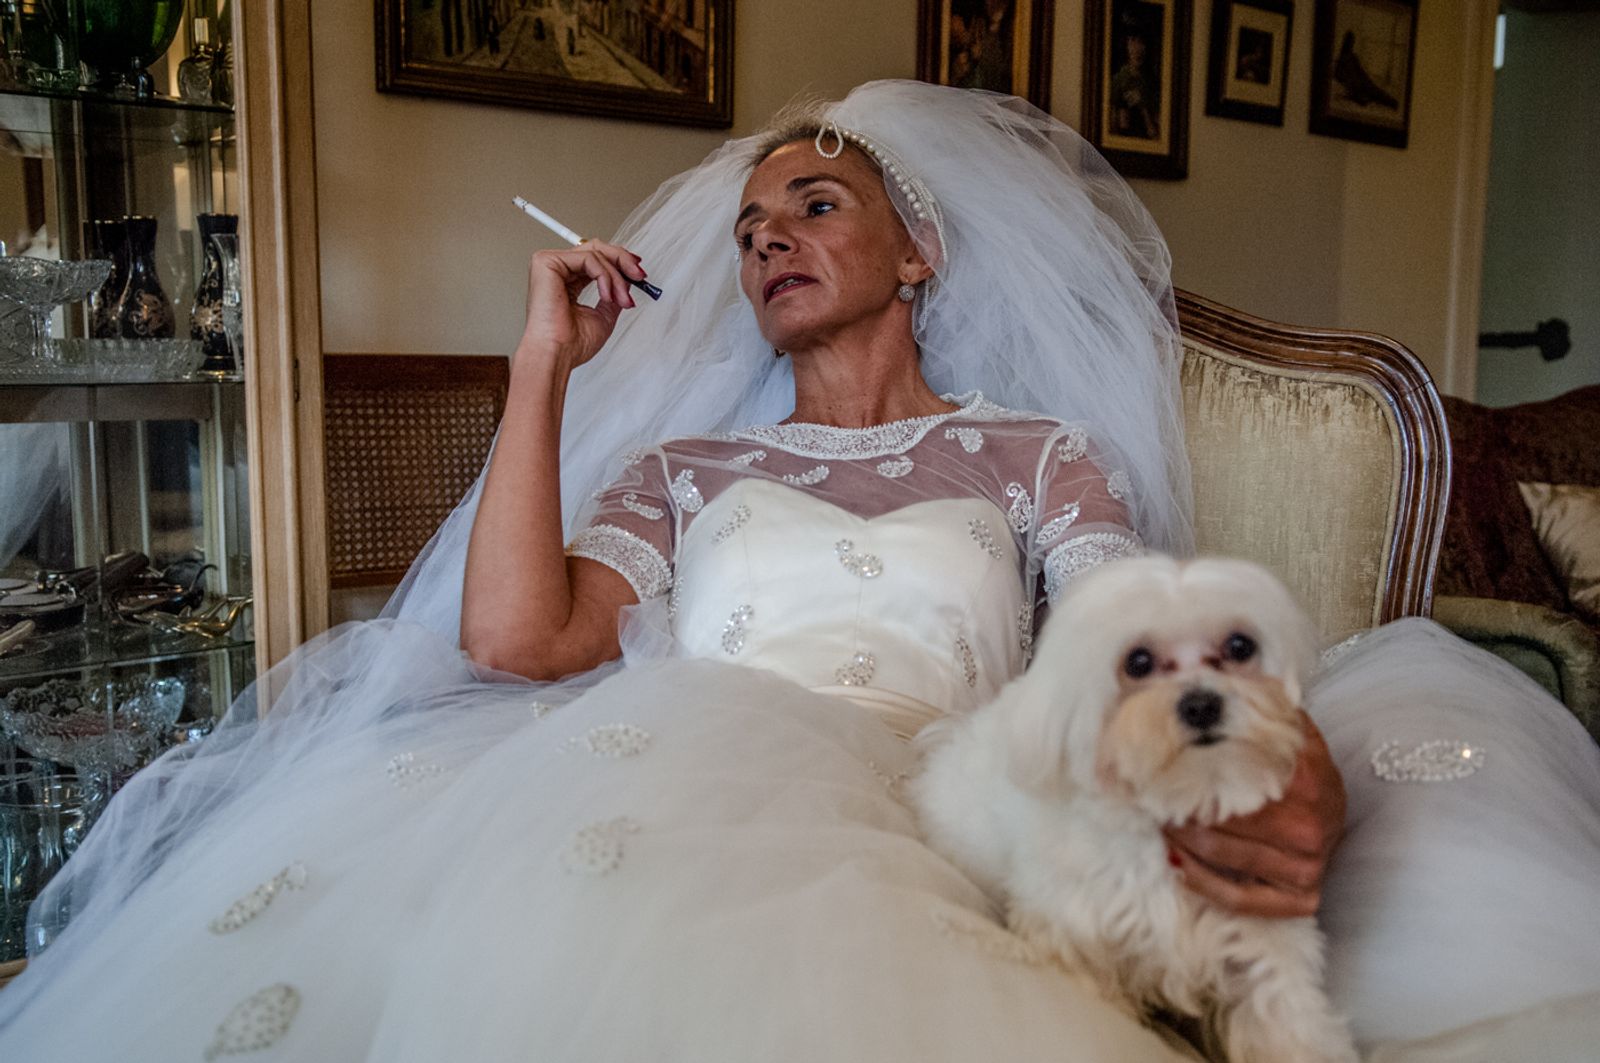 © Leticia Valverdes - Elaine has kept her wedding dress for many years despite splitting up from husband not long after wedding.